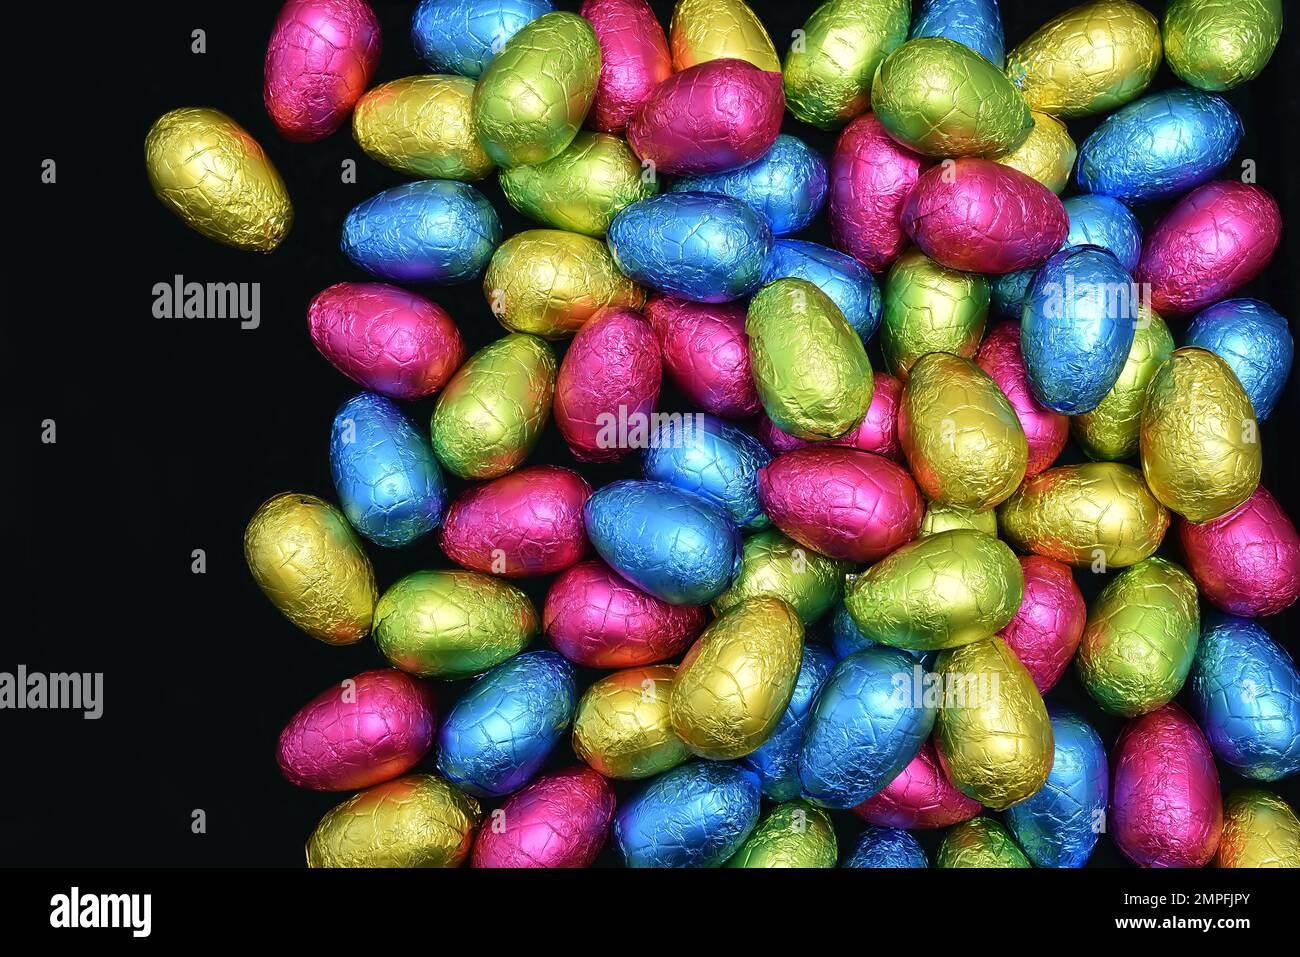 Pile of multi coloured and different sizes of foil wrapped chocolate easter eggs in pink, blue, yellow and lime green against a black background. Stock Photo